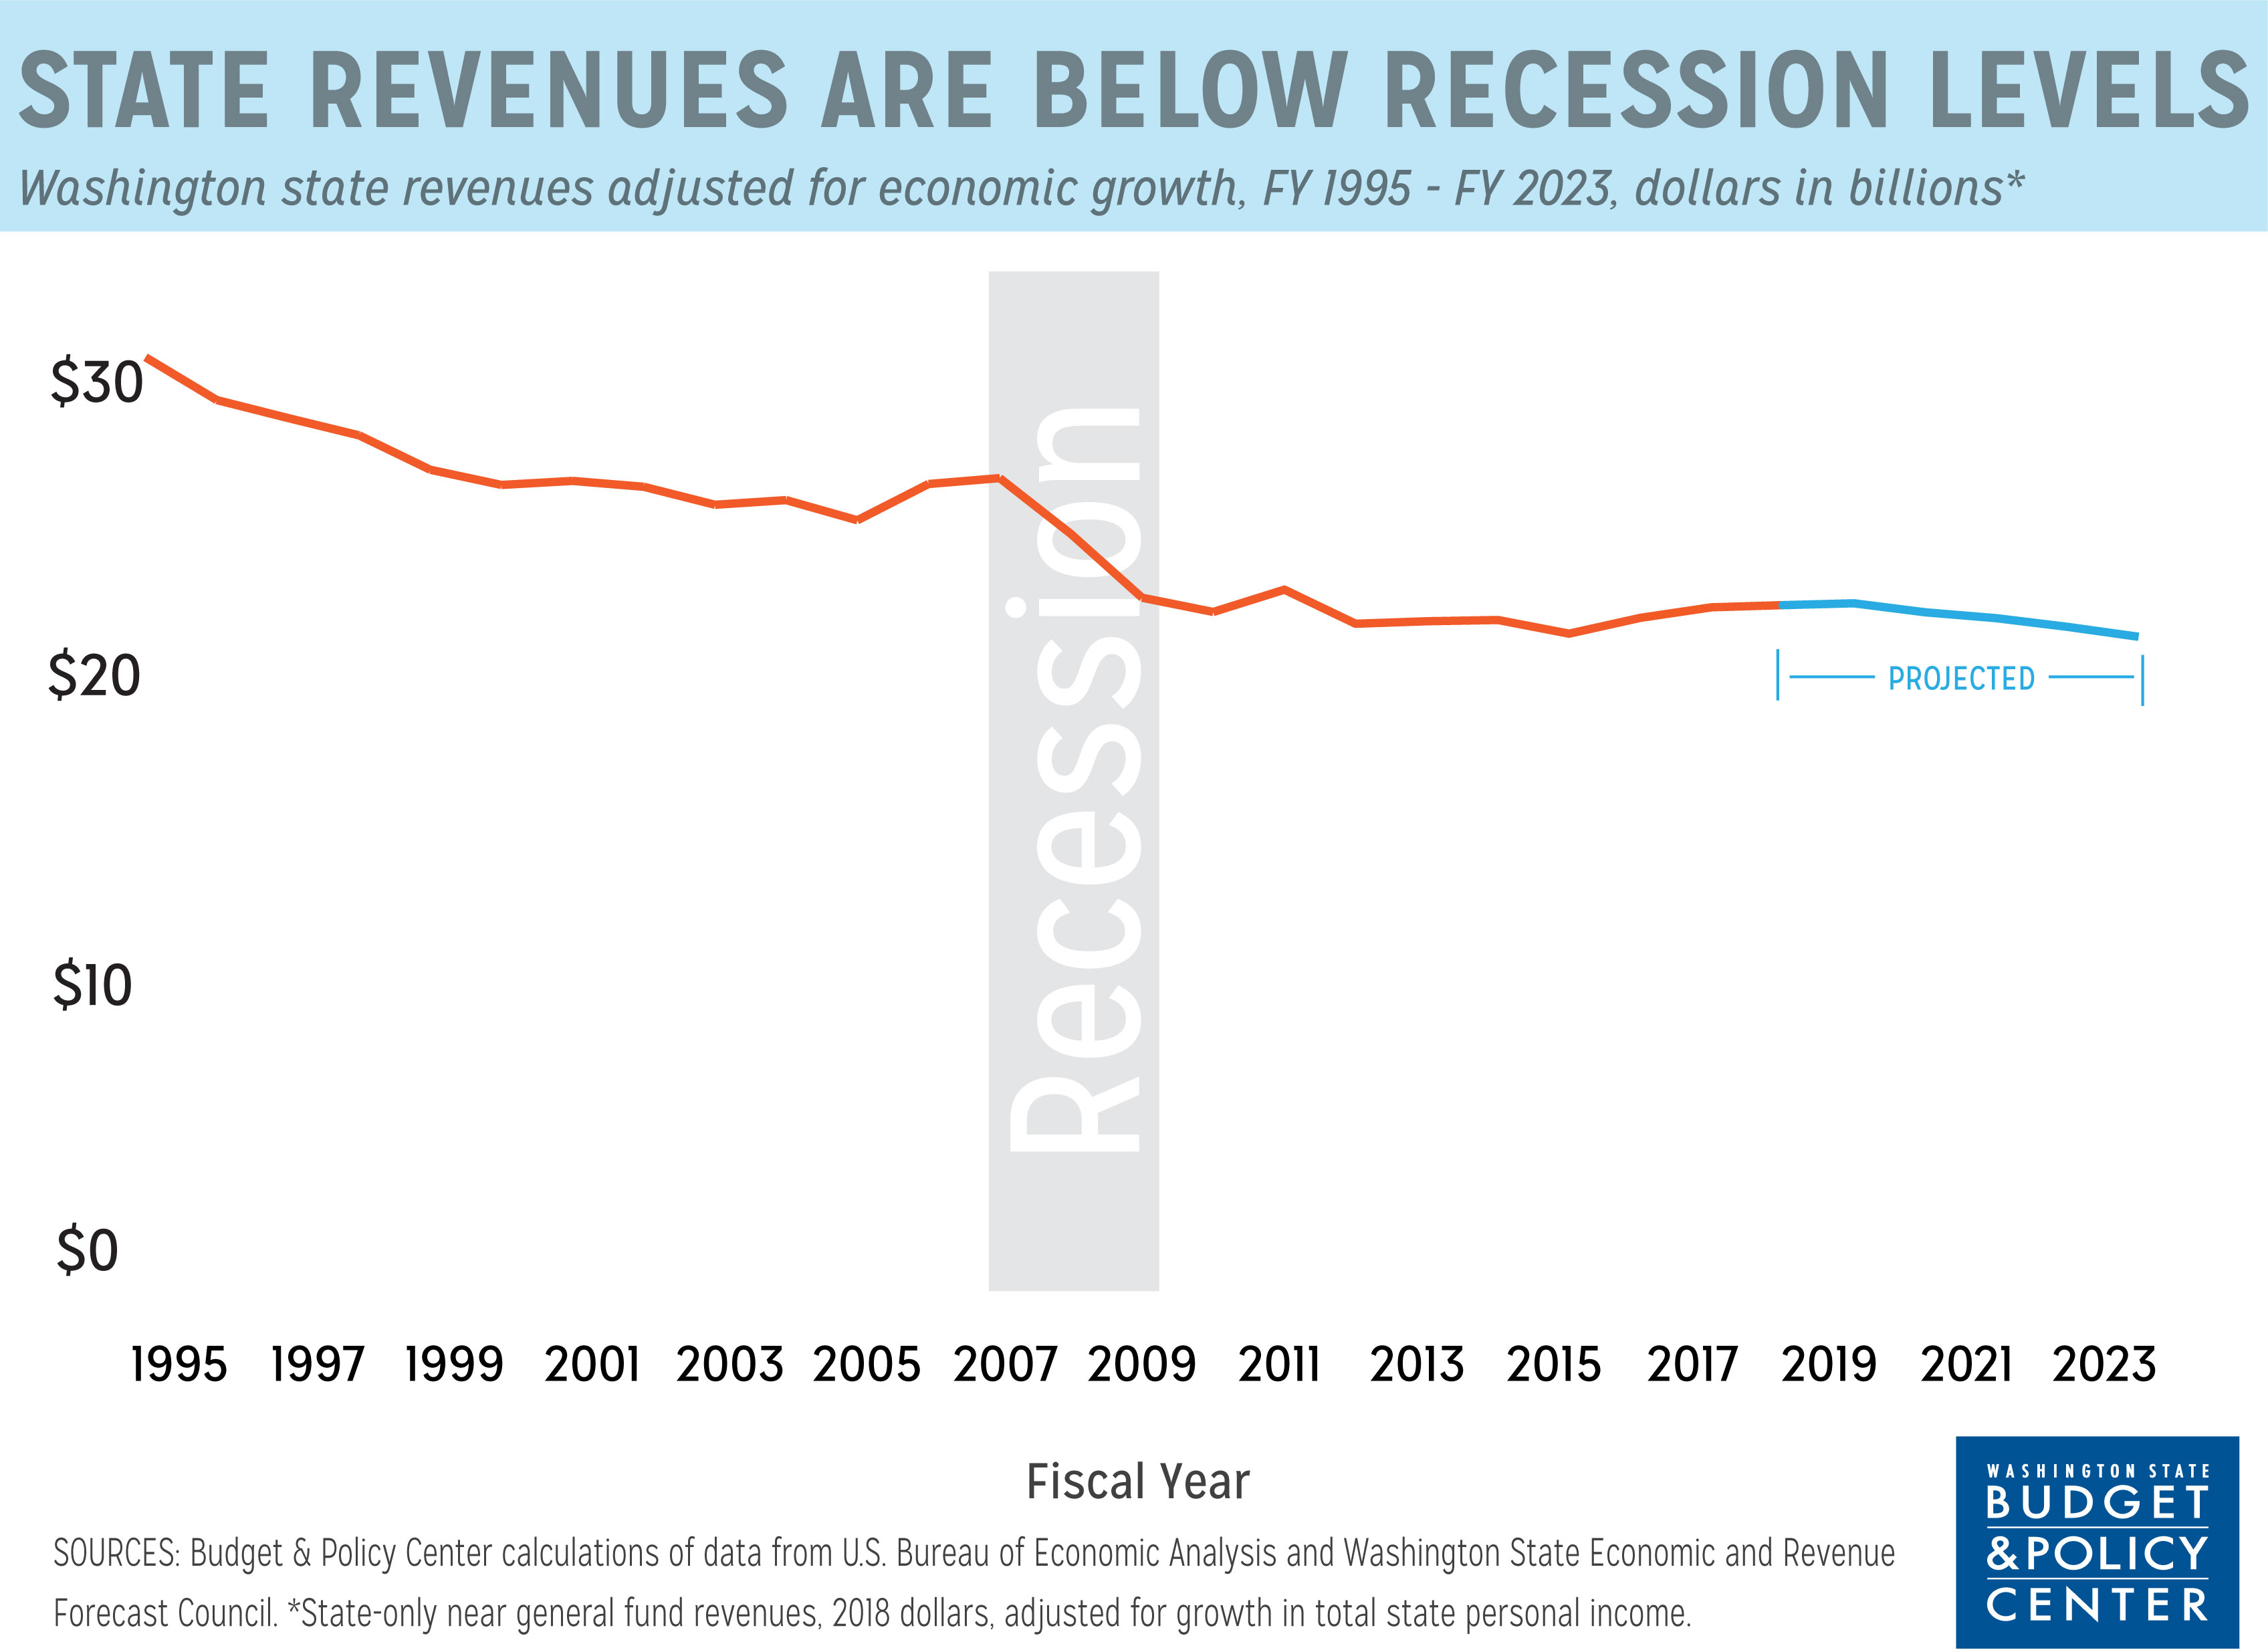 Graph of Washington revenue from 1995 to 2023 demonstrating the current rate as less than recession levels. 